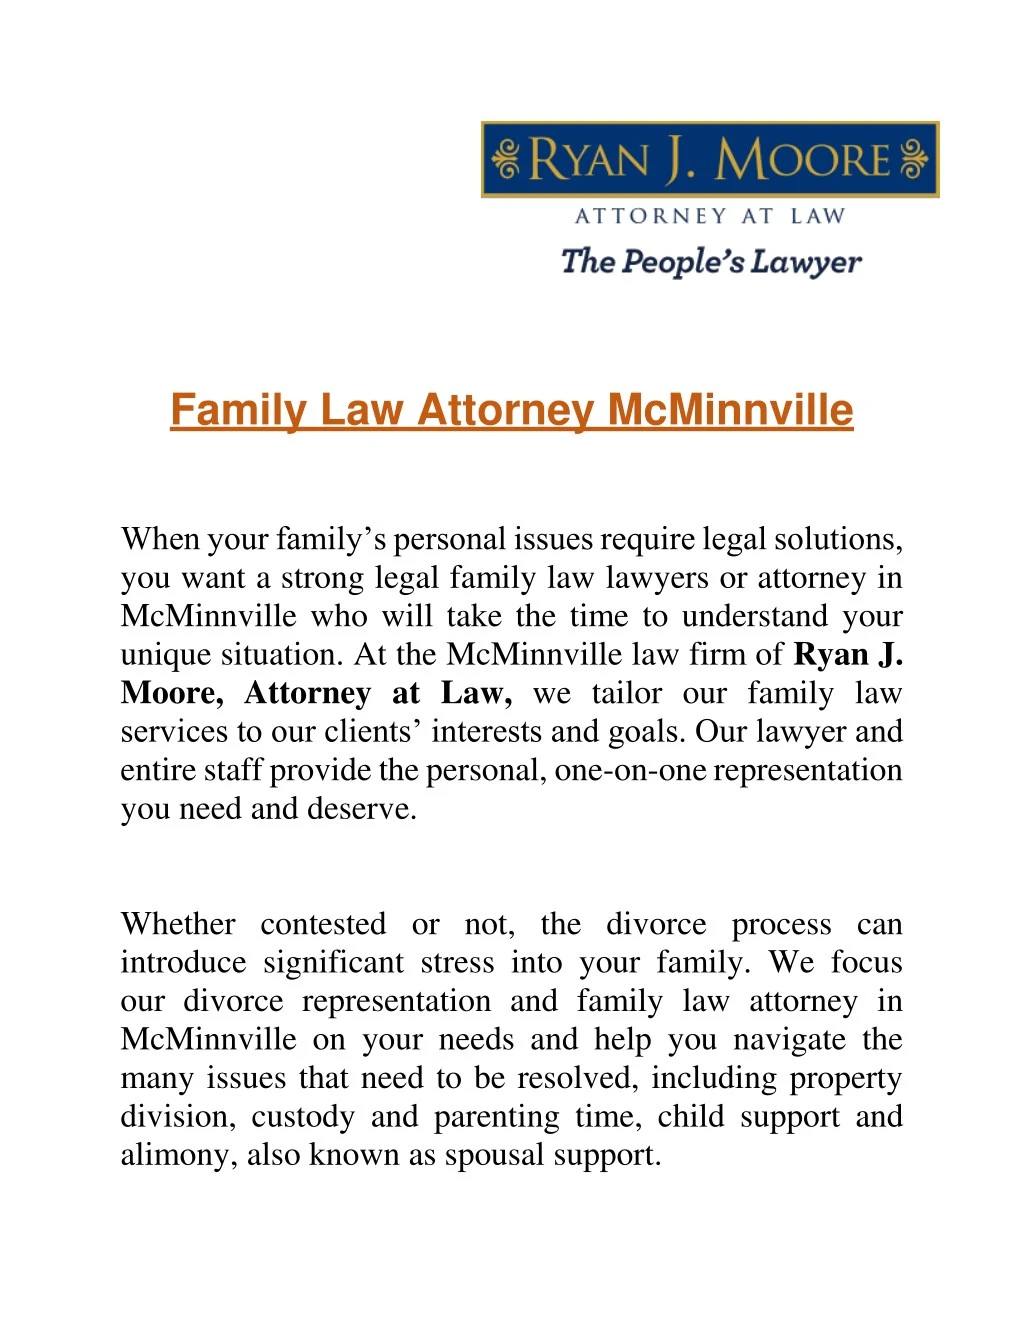 family law attorney mcminnville